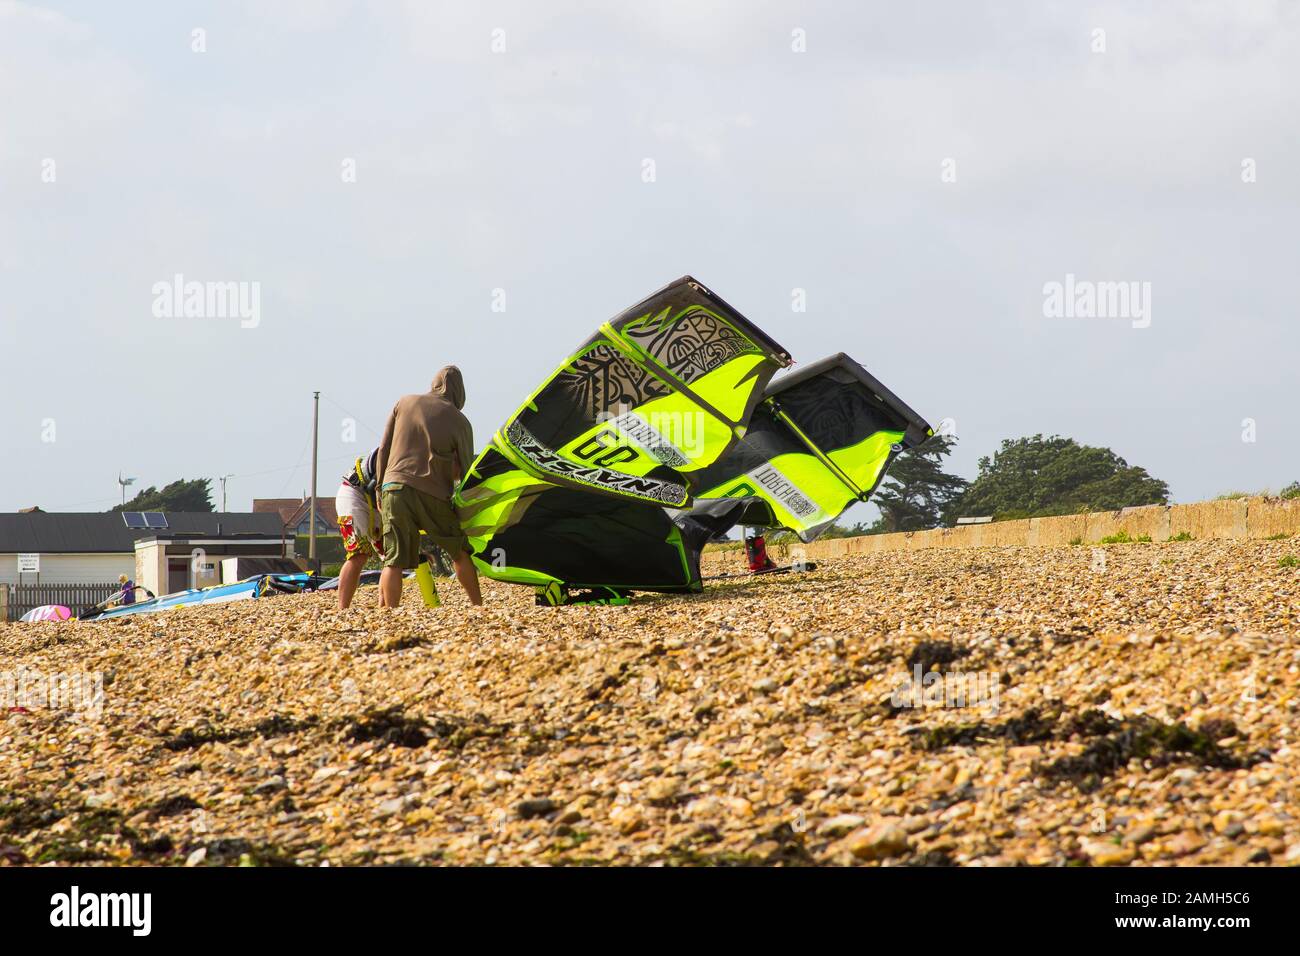 9 June 2017 A couple of young men struggle against a stiff breeze to prepare their para glider for an afternoons sport at the beach in Titchfield, Ham Stock Photo